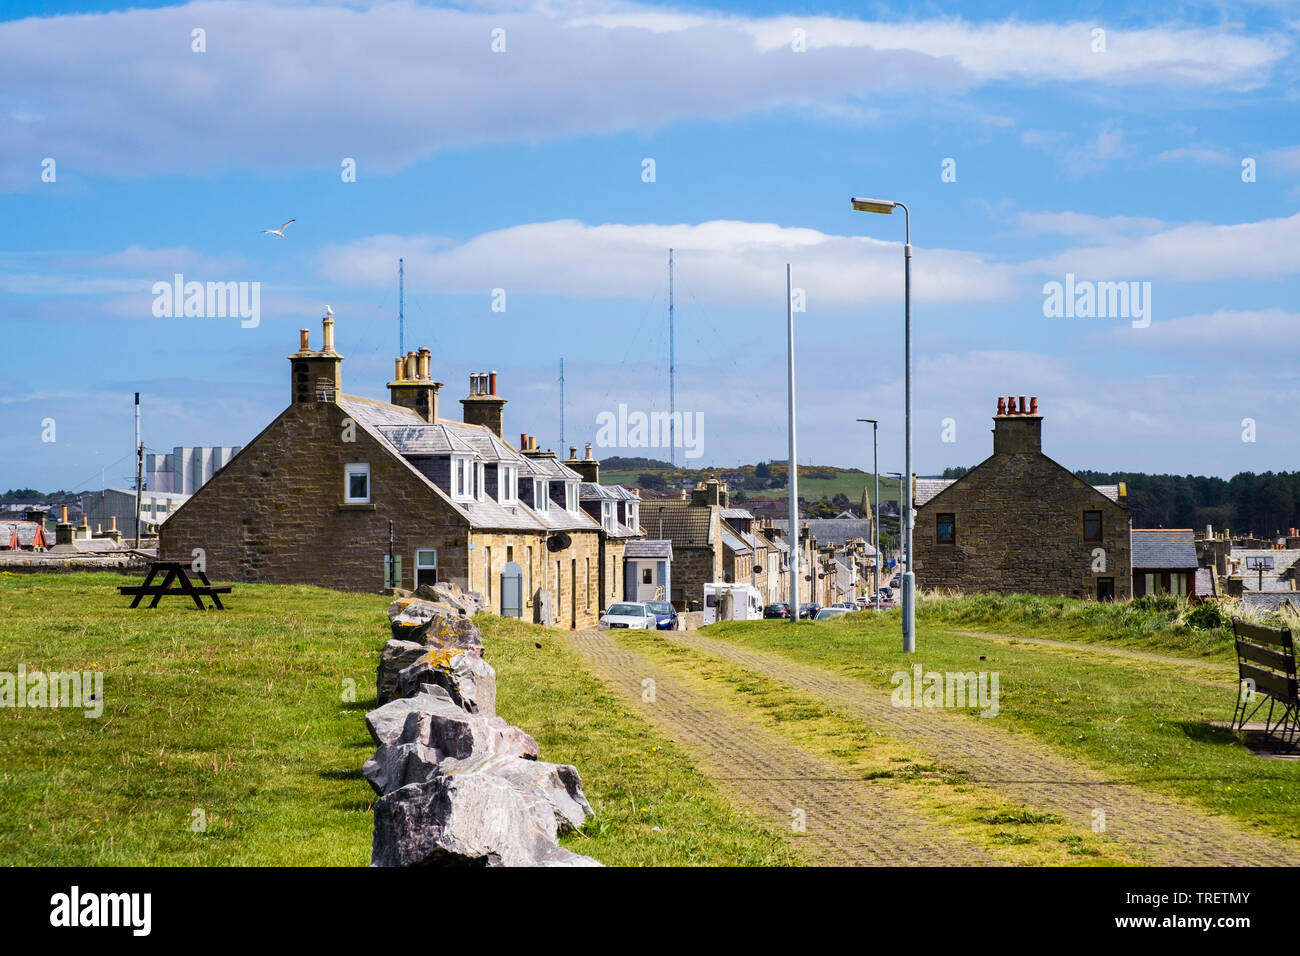 Traditional Scottish houses on Grant Street in historic village seen from headland. Burghead, Moray, Scotland, UK, Britain Stock Photo